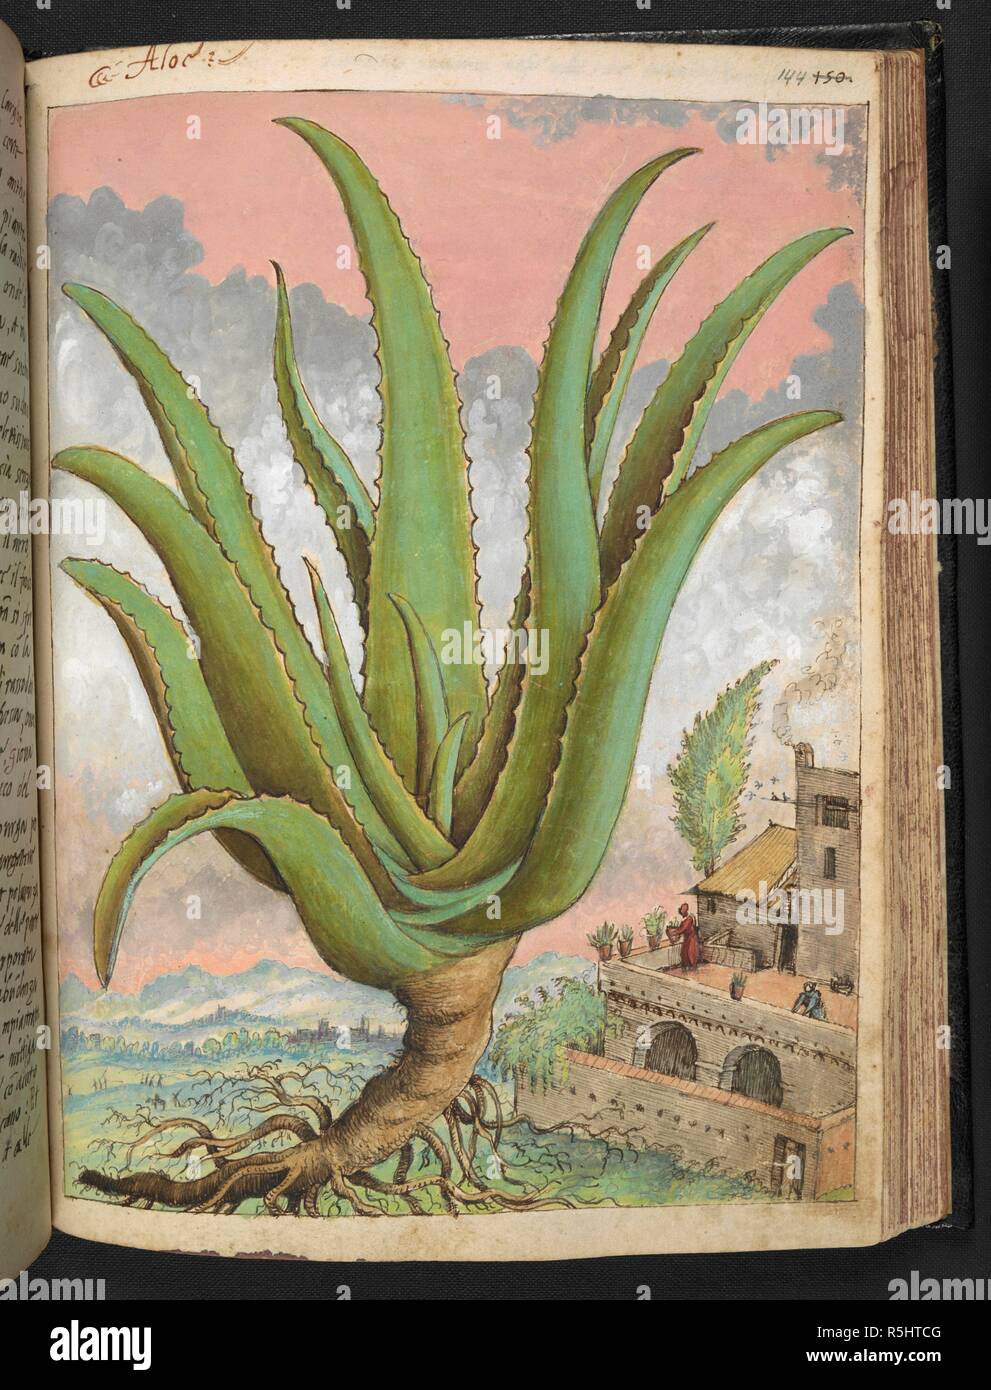 Aloe, also written AloÃ«, is a genus containing over 500 species of flowering succulent plants. The most widely known species is Aloe vera. Coloured drawings of plants, copied from nature in the Roman States, by Gerardo Cibo. Vol. I. Pietro Andrea Mattioli, Physician, of Siena: Extracts from his edition of Dioscorides' 'de re Medica':. Italy, c. 1564-1584. Source: Add. 22332 f.144. Language: Italian. Author: Cibo, Gheraldo. Stock Photo